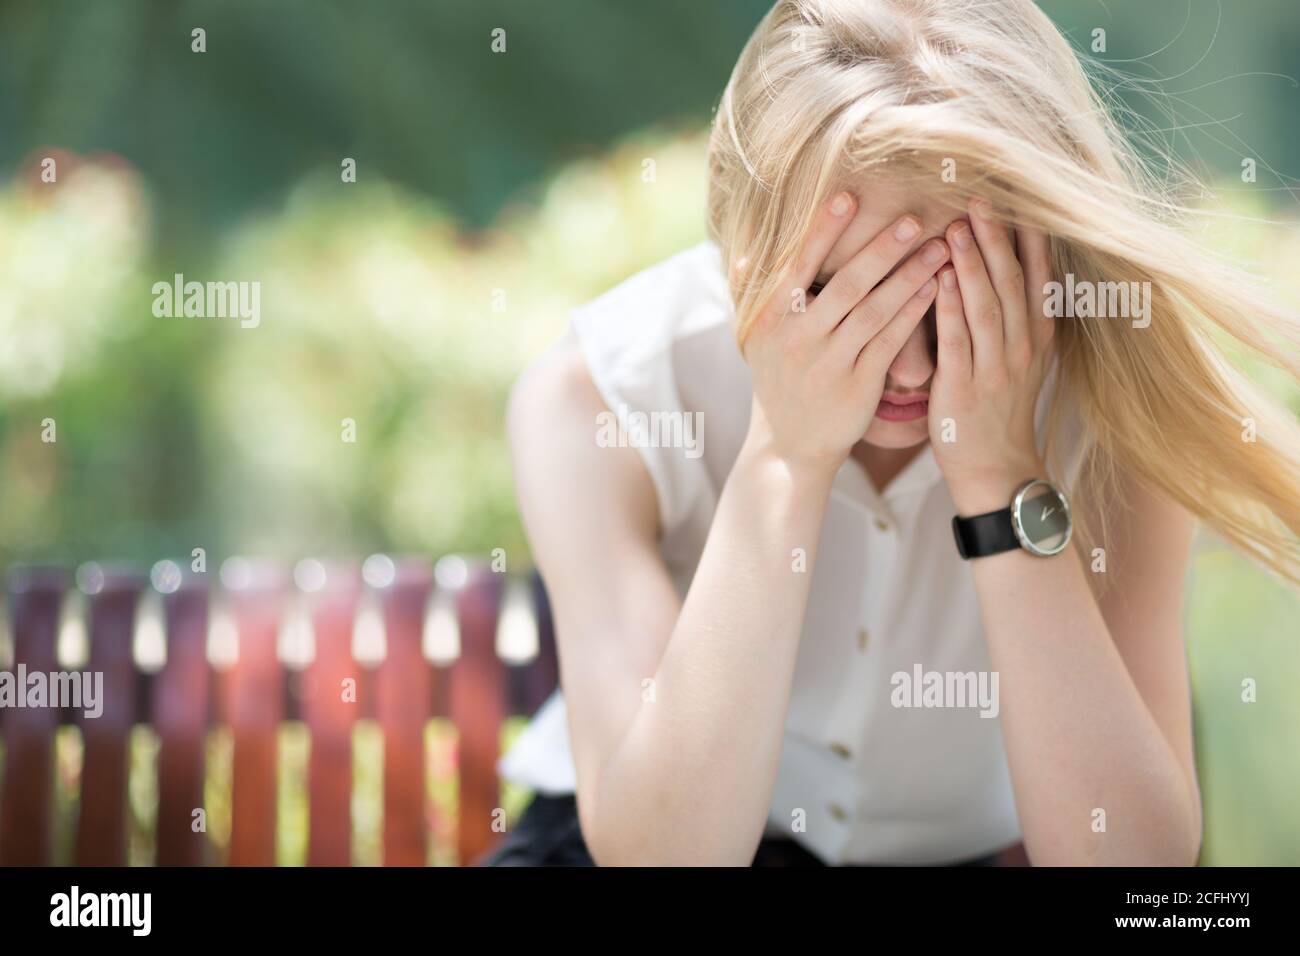 Anxiety and depression. Sad young woman in pain crying and covering her face while sitting alone on a park bench on a sunny day. Stock Photo